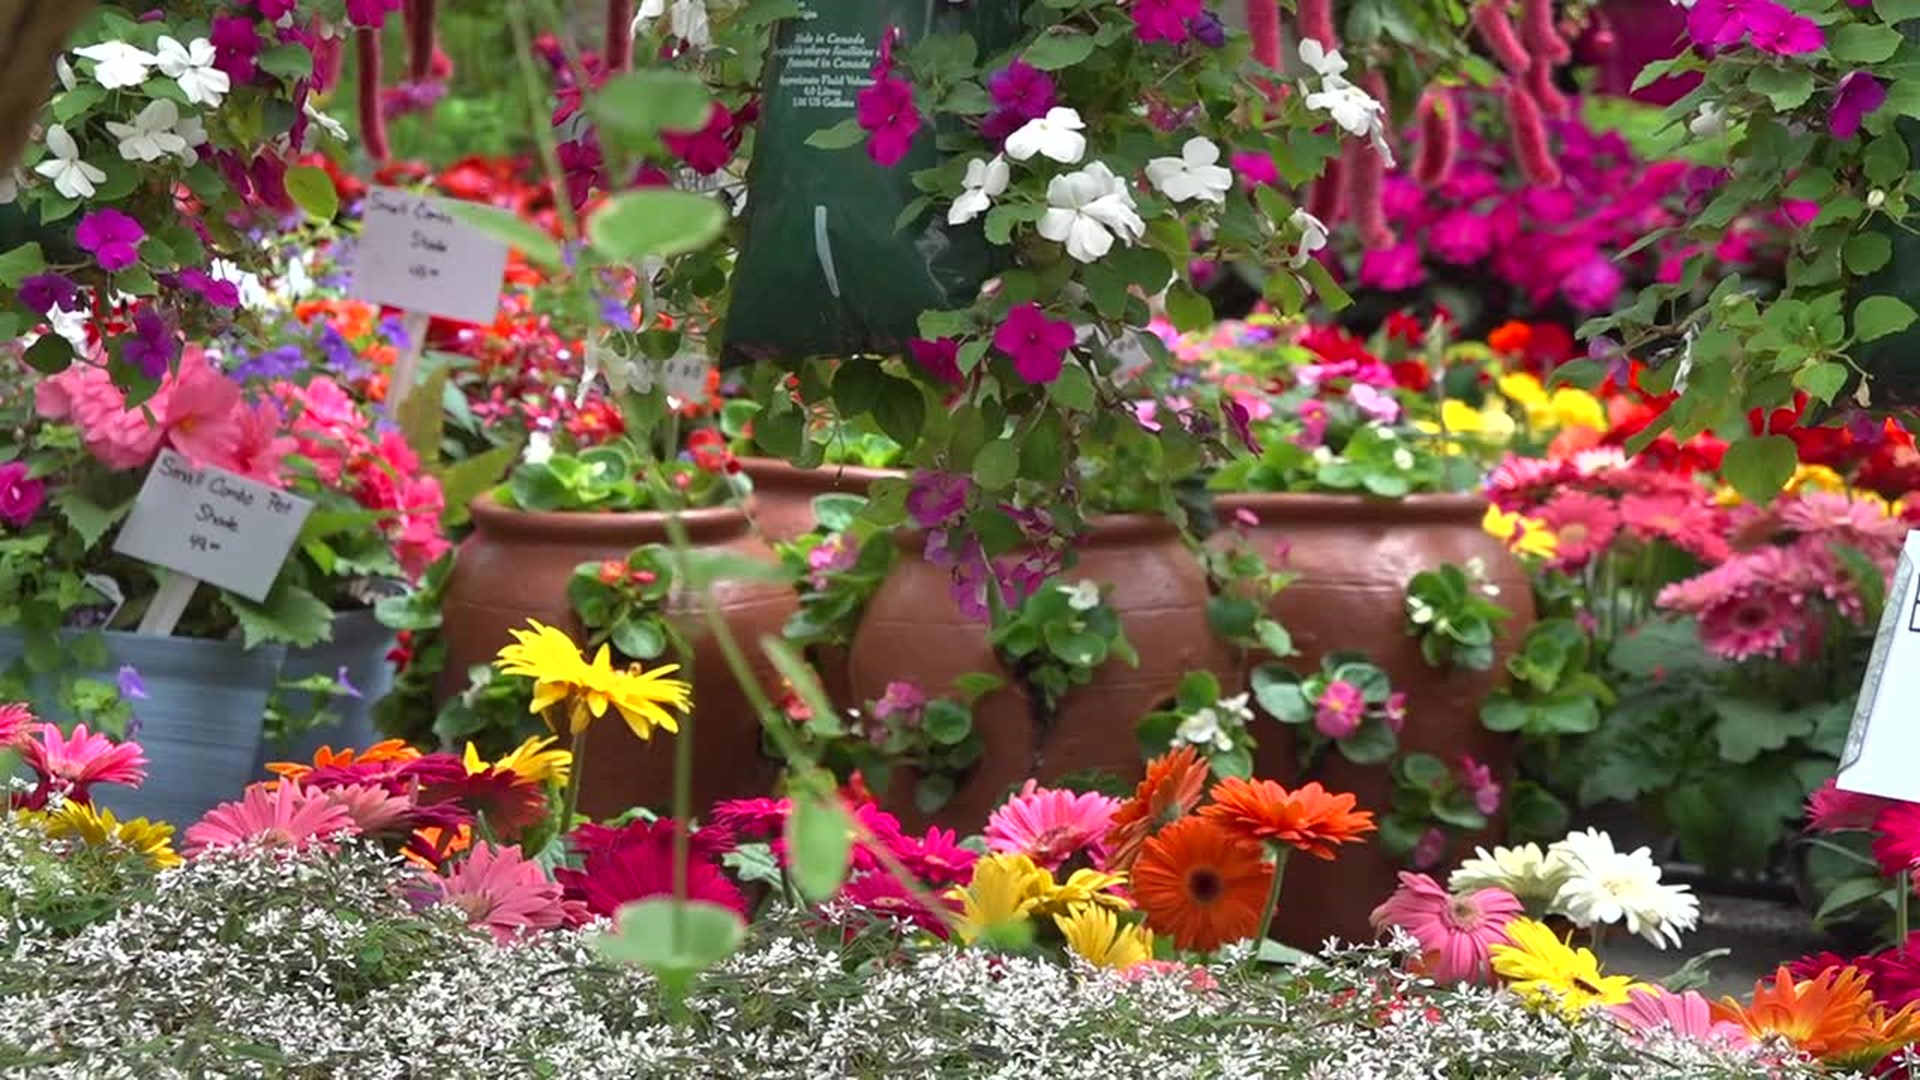 Farmers in Luzerne County are expecting a bit of a break in rainy weather and have some tips for people who are anxious to get outside and into their gardens.